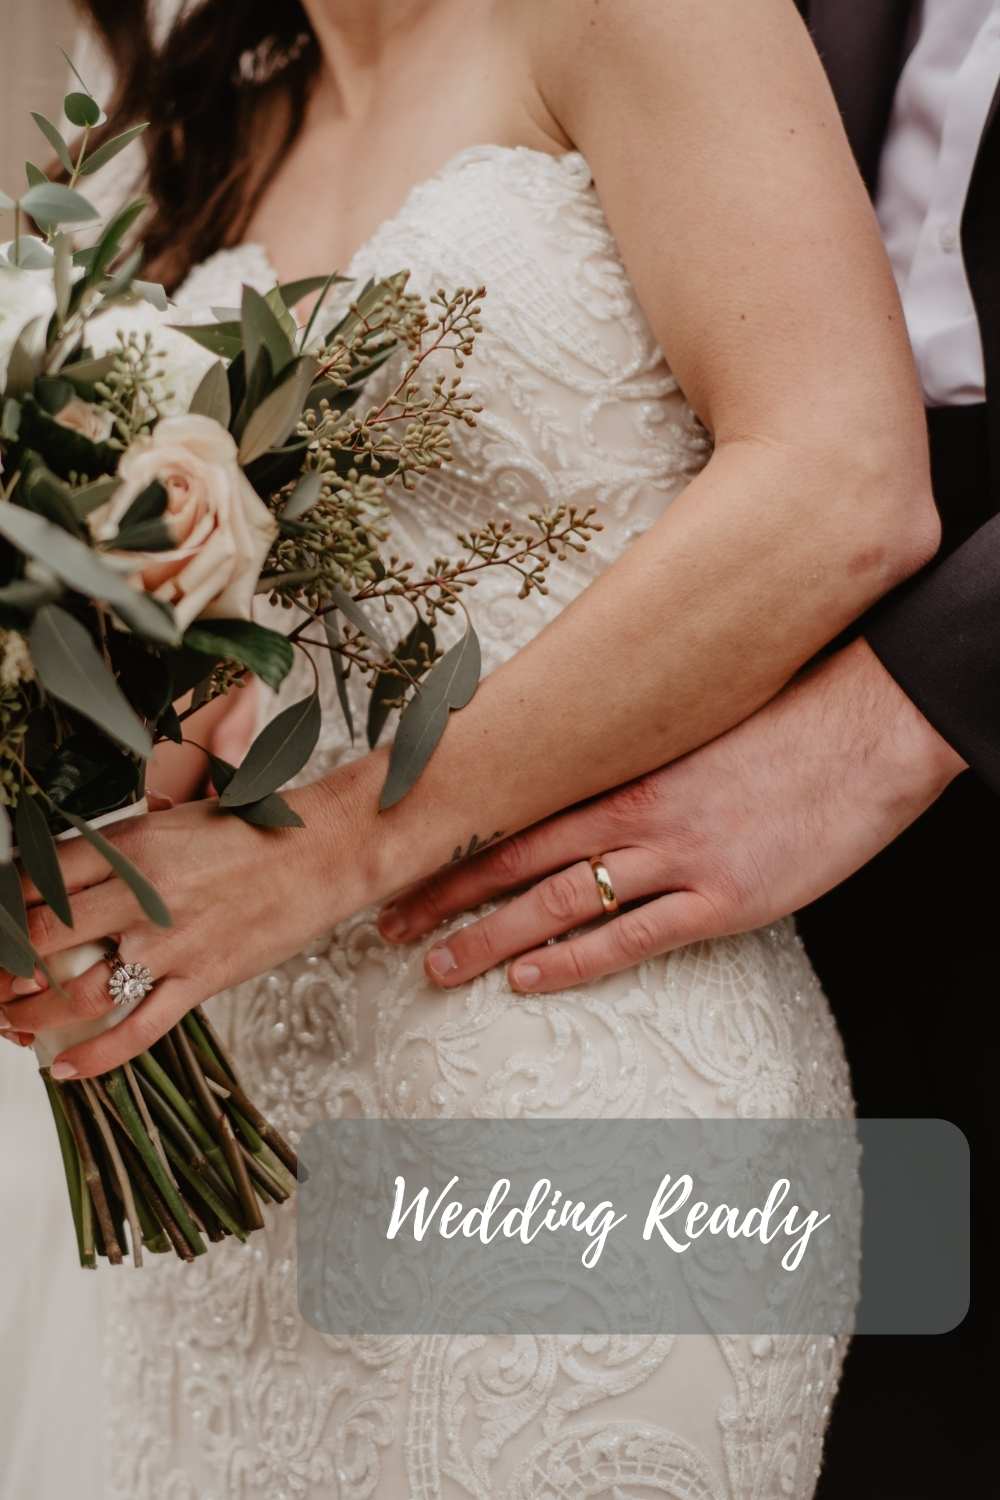 Realistic and Unrealistic Ways to Get Your Body “Wedding Ready”